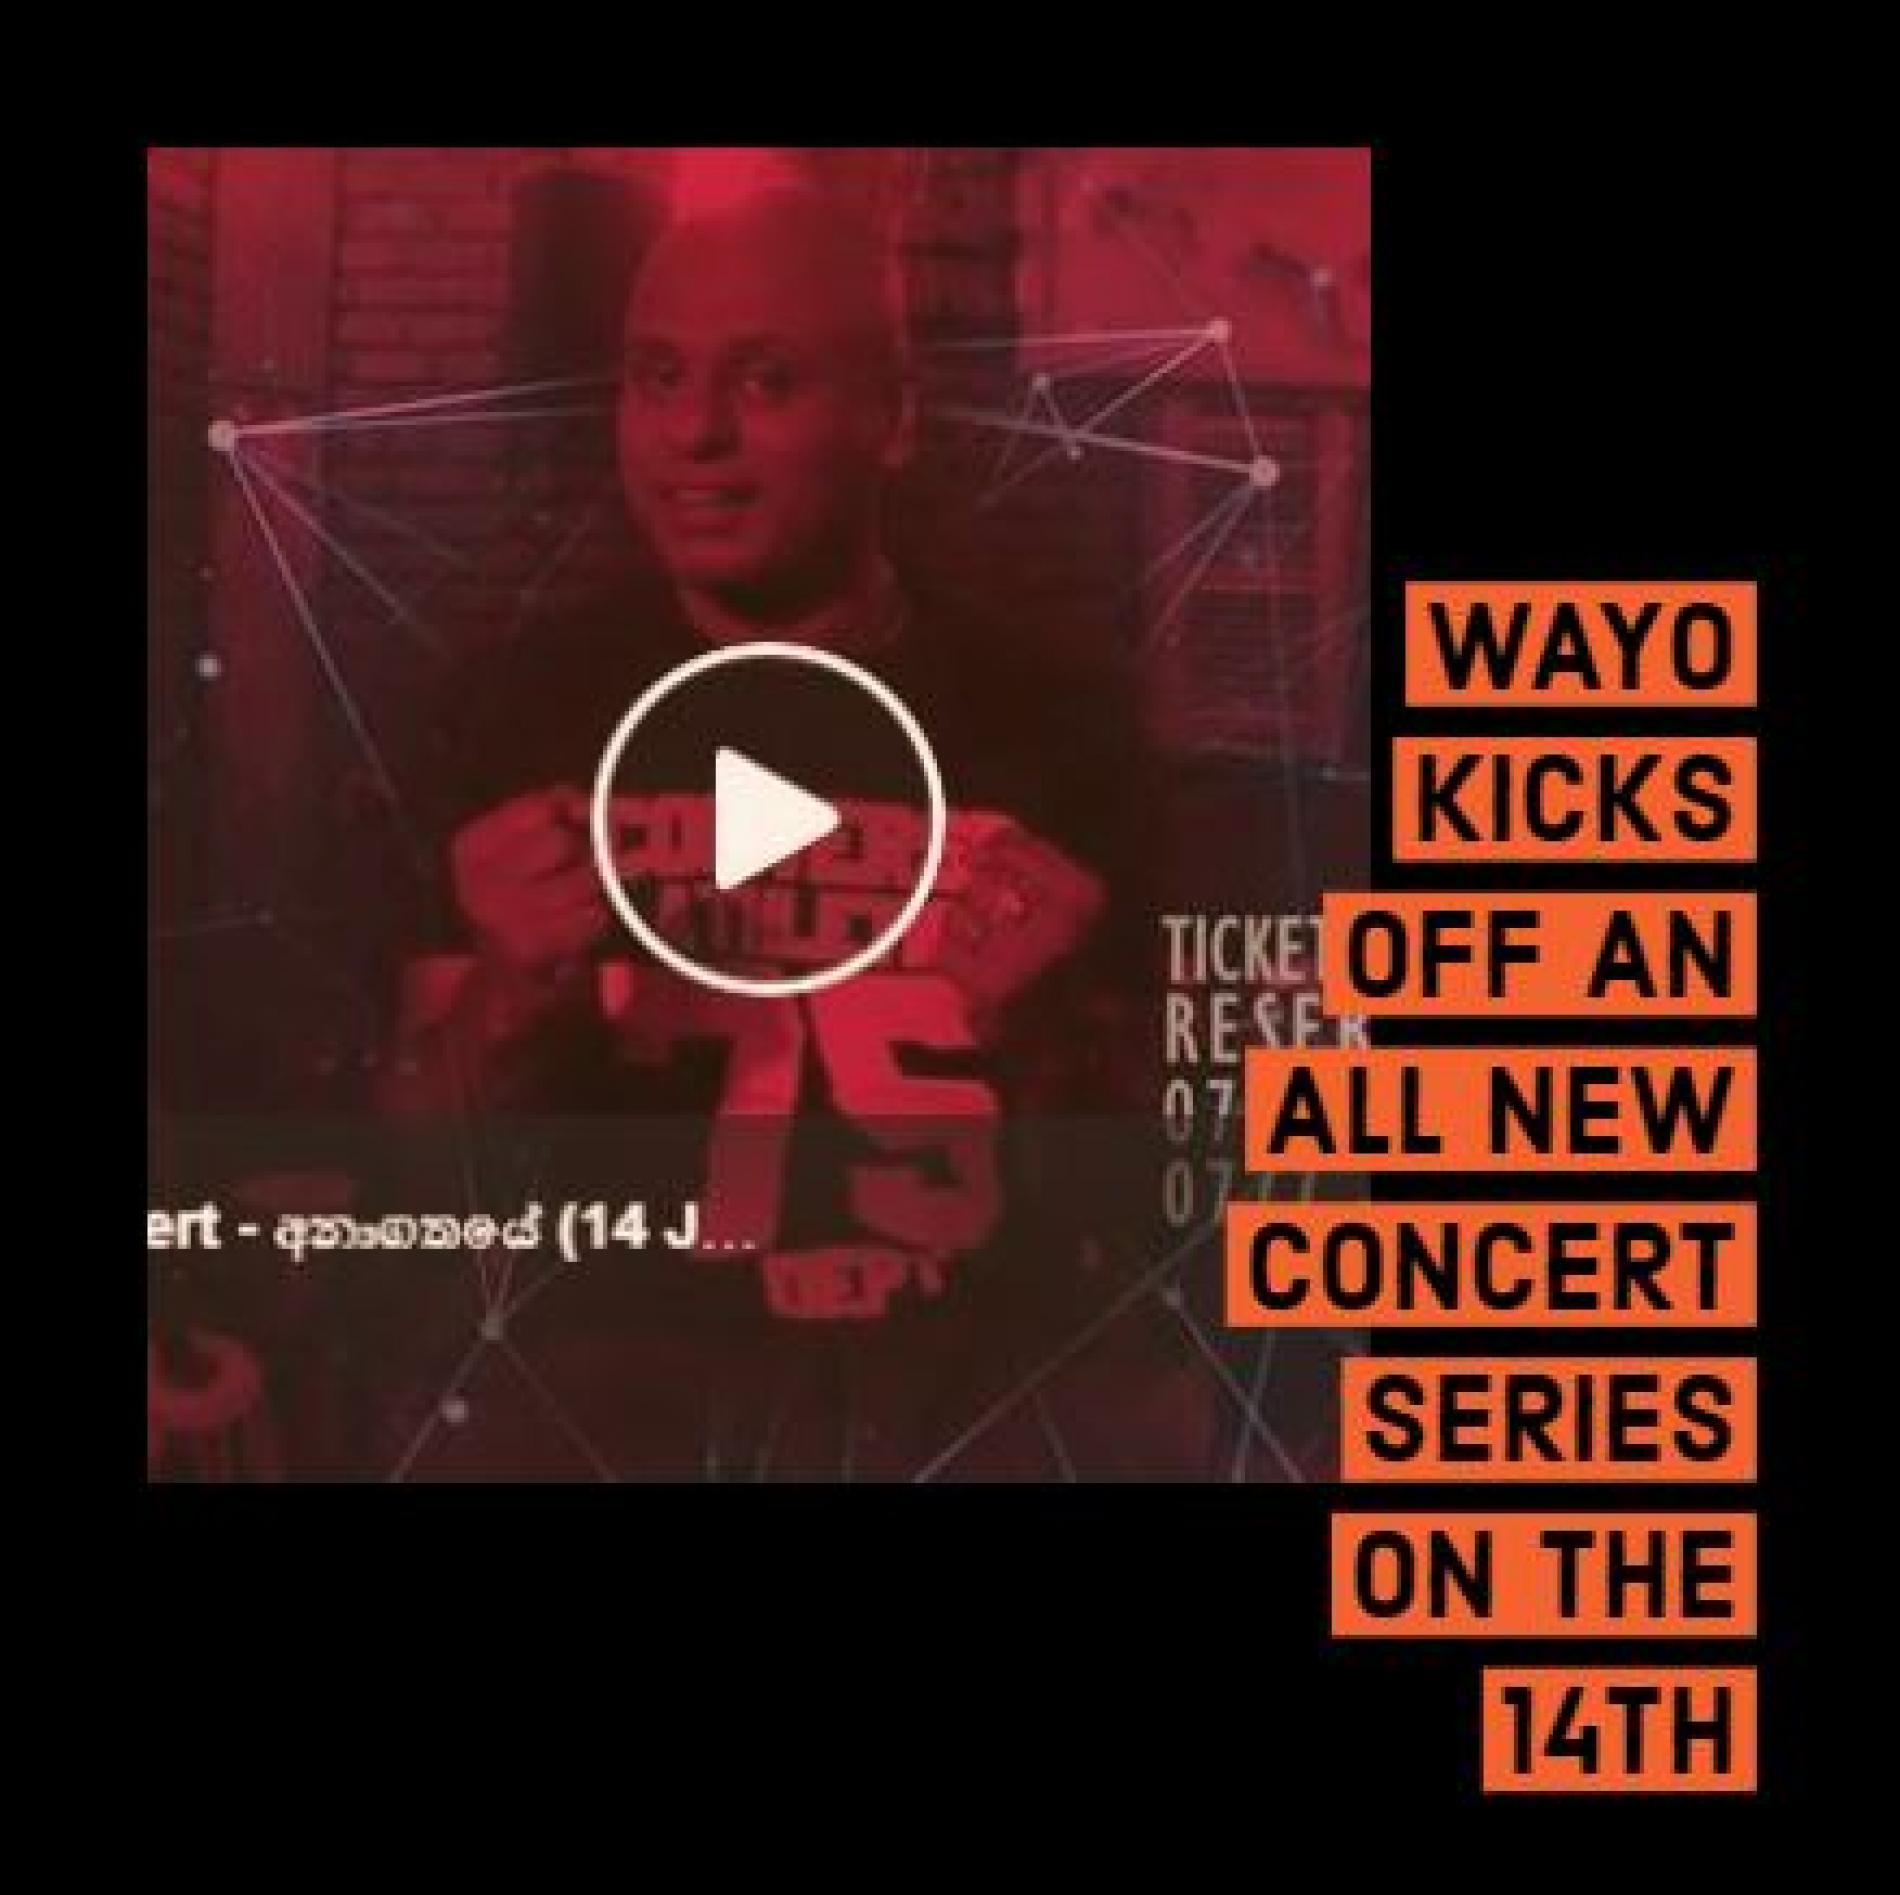 Wayo Is Back With Another Concert Series!